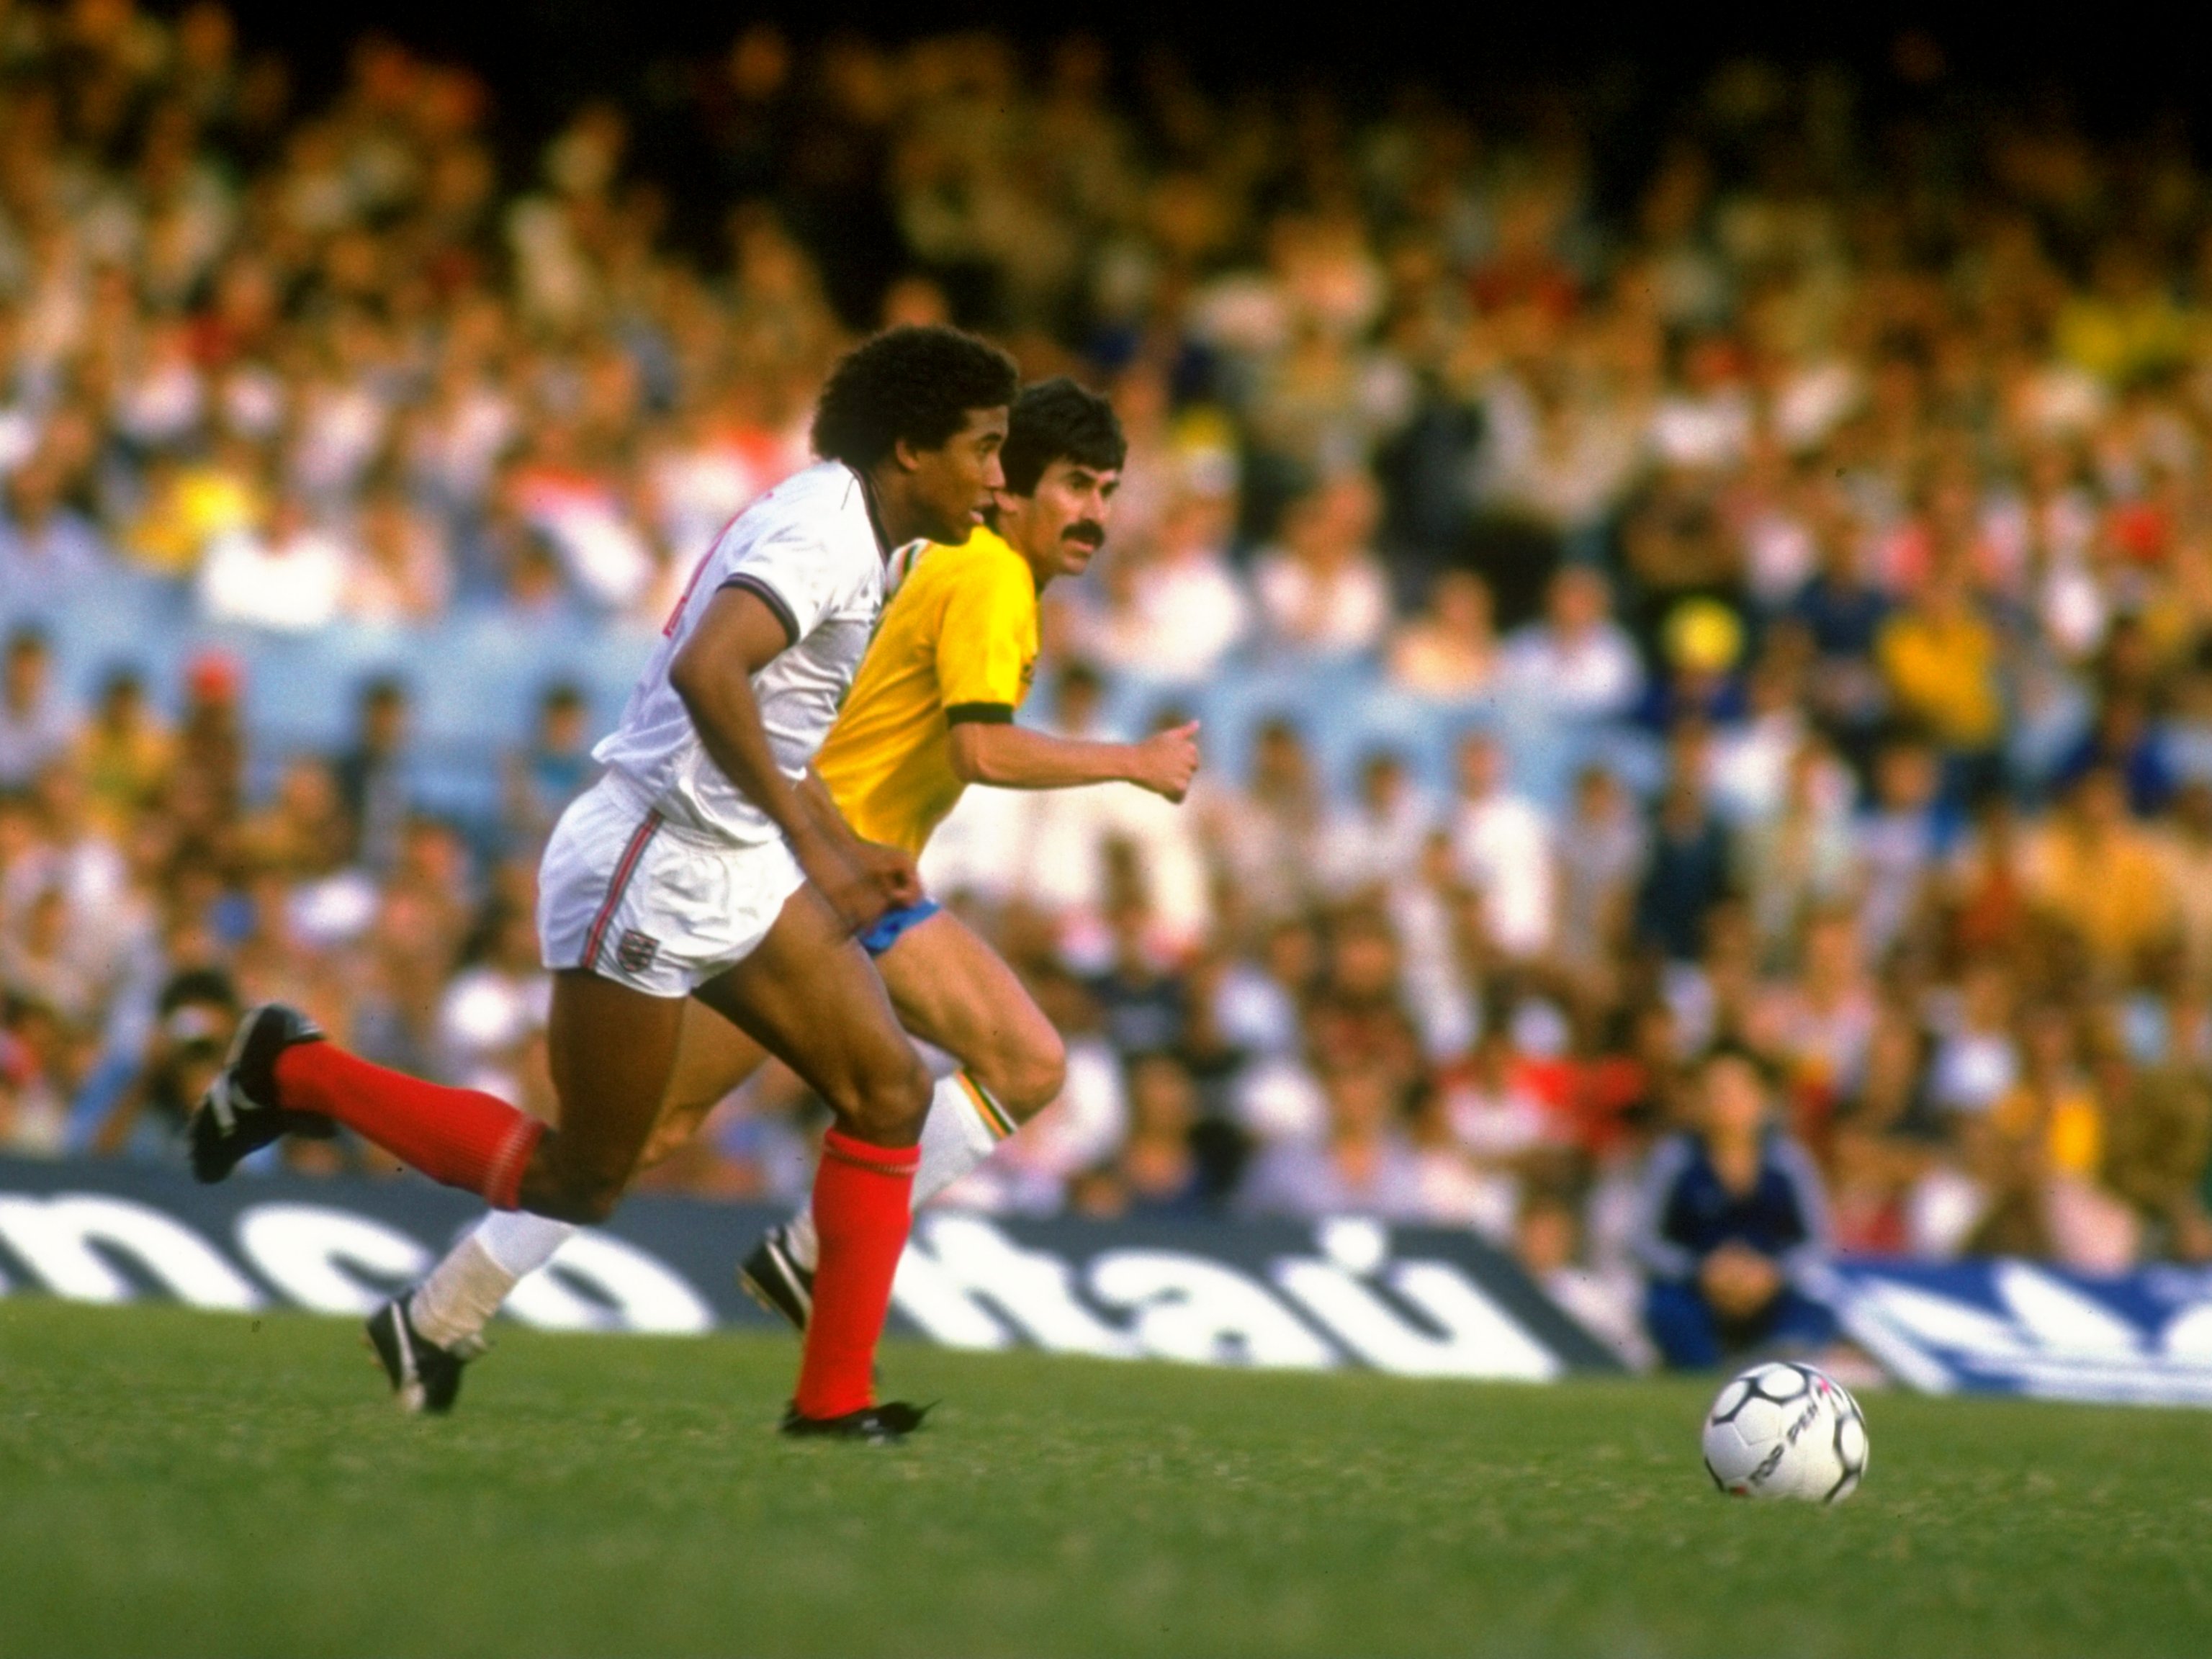 1984:  John Barnes of England starts a run on the goal during the international match against Brazil played at the Maracana Stadium in Rio de Janeiro, Brazil. England won the match 2-0. \ Mandatory Credit: David  Cannon/Allsport